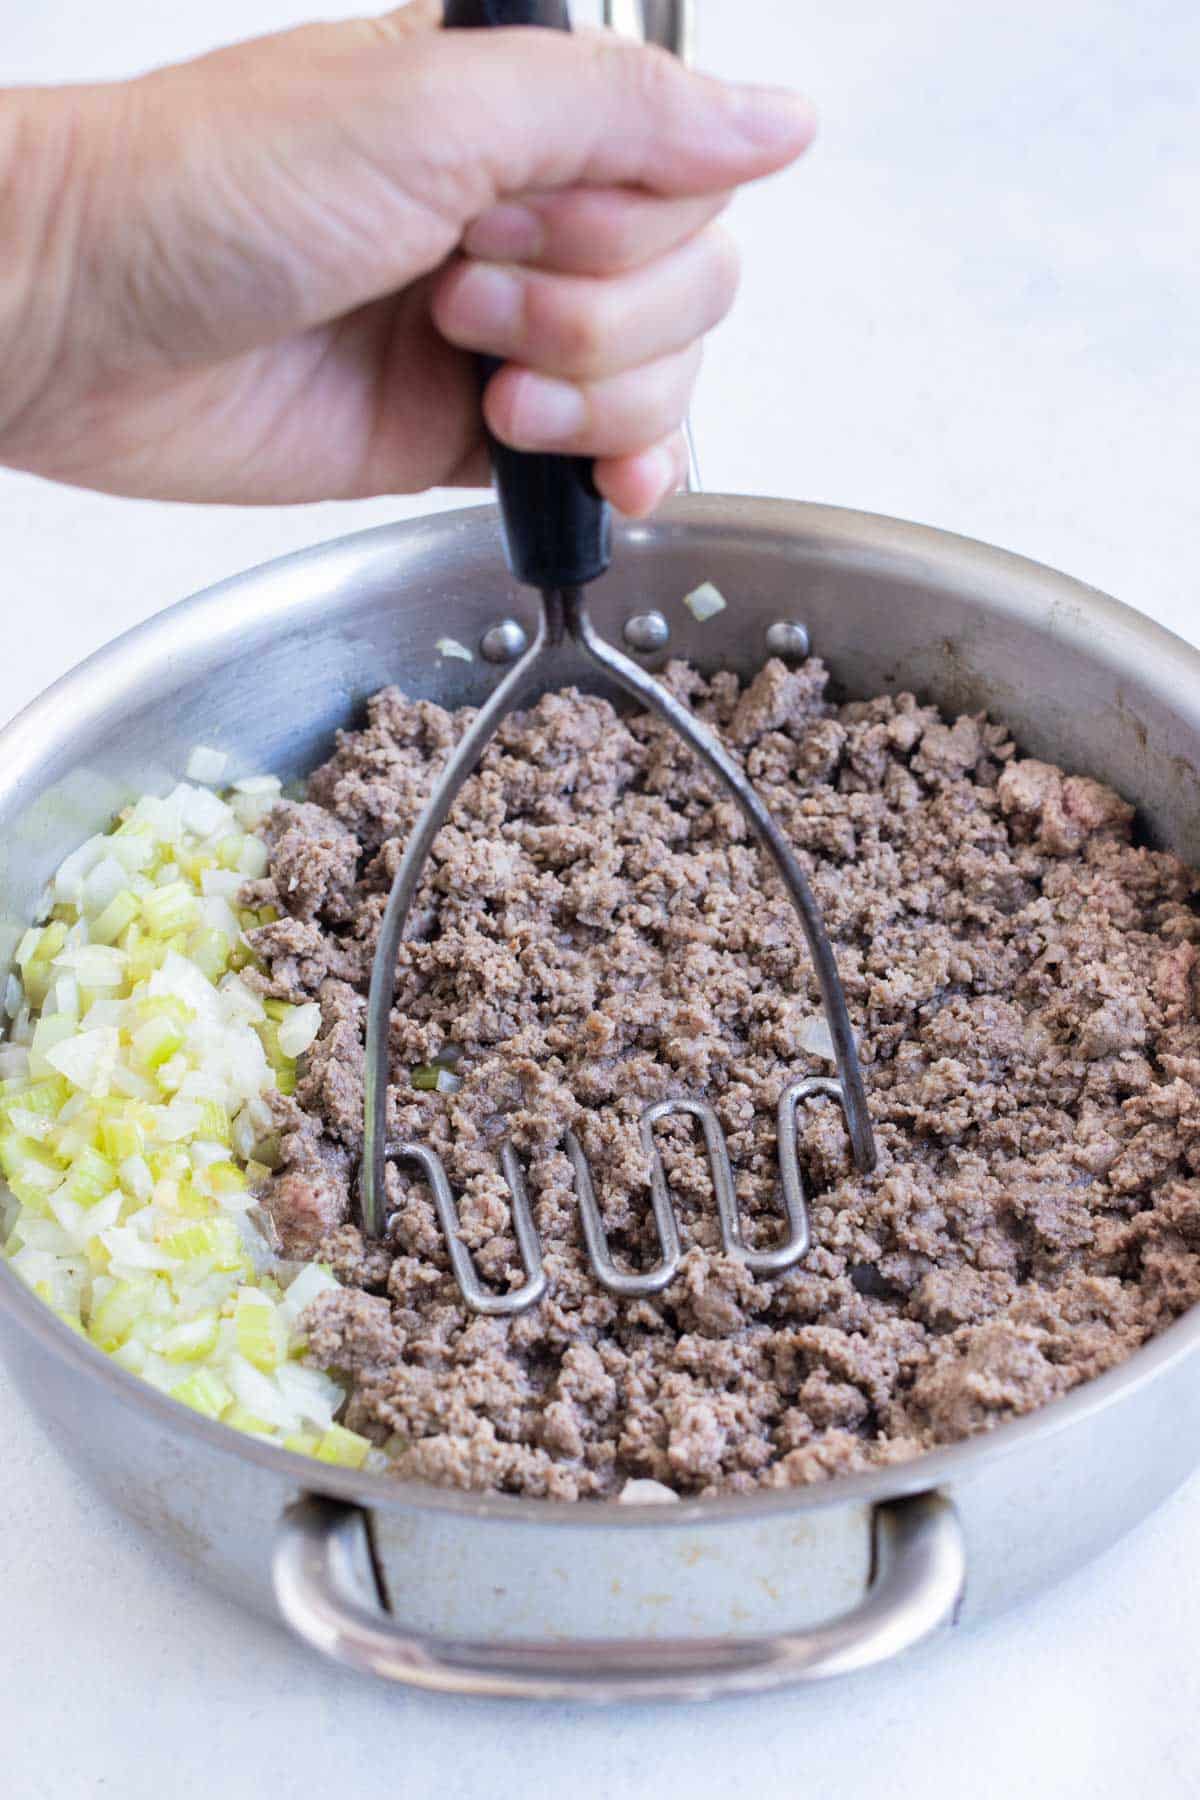 A potato masher crumbles ground beef.